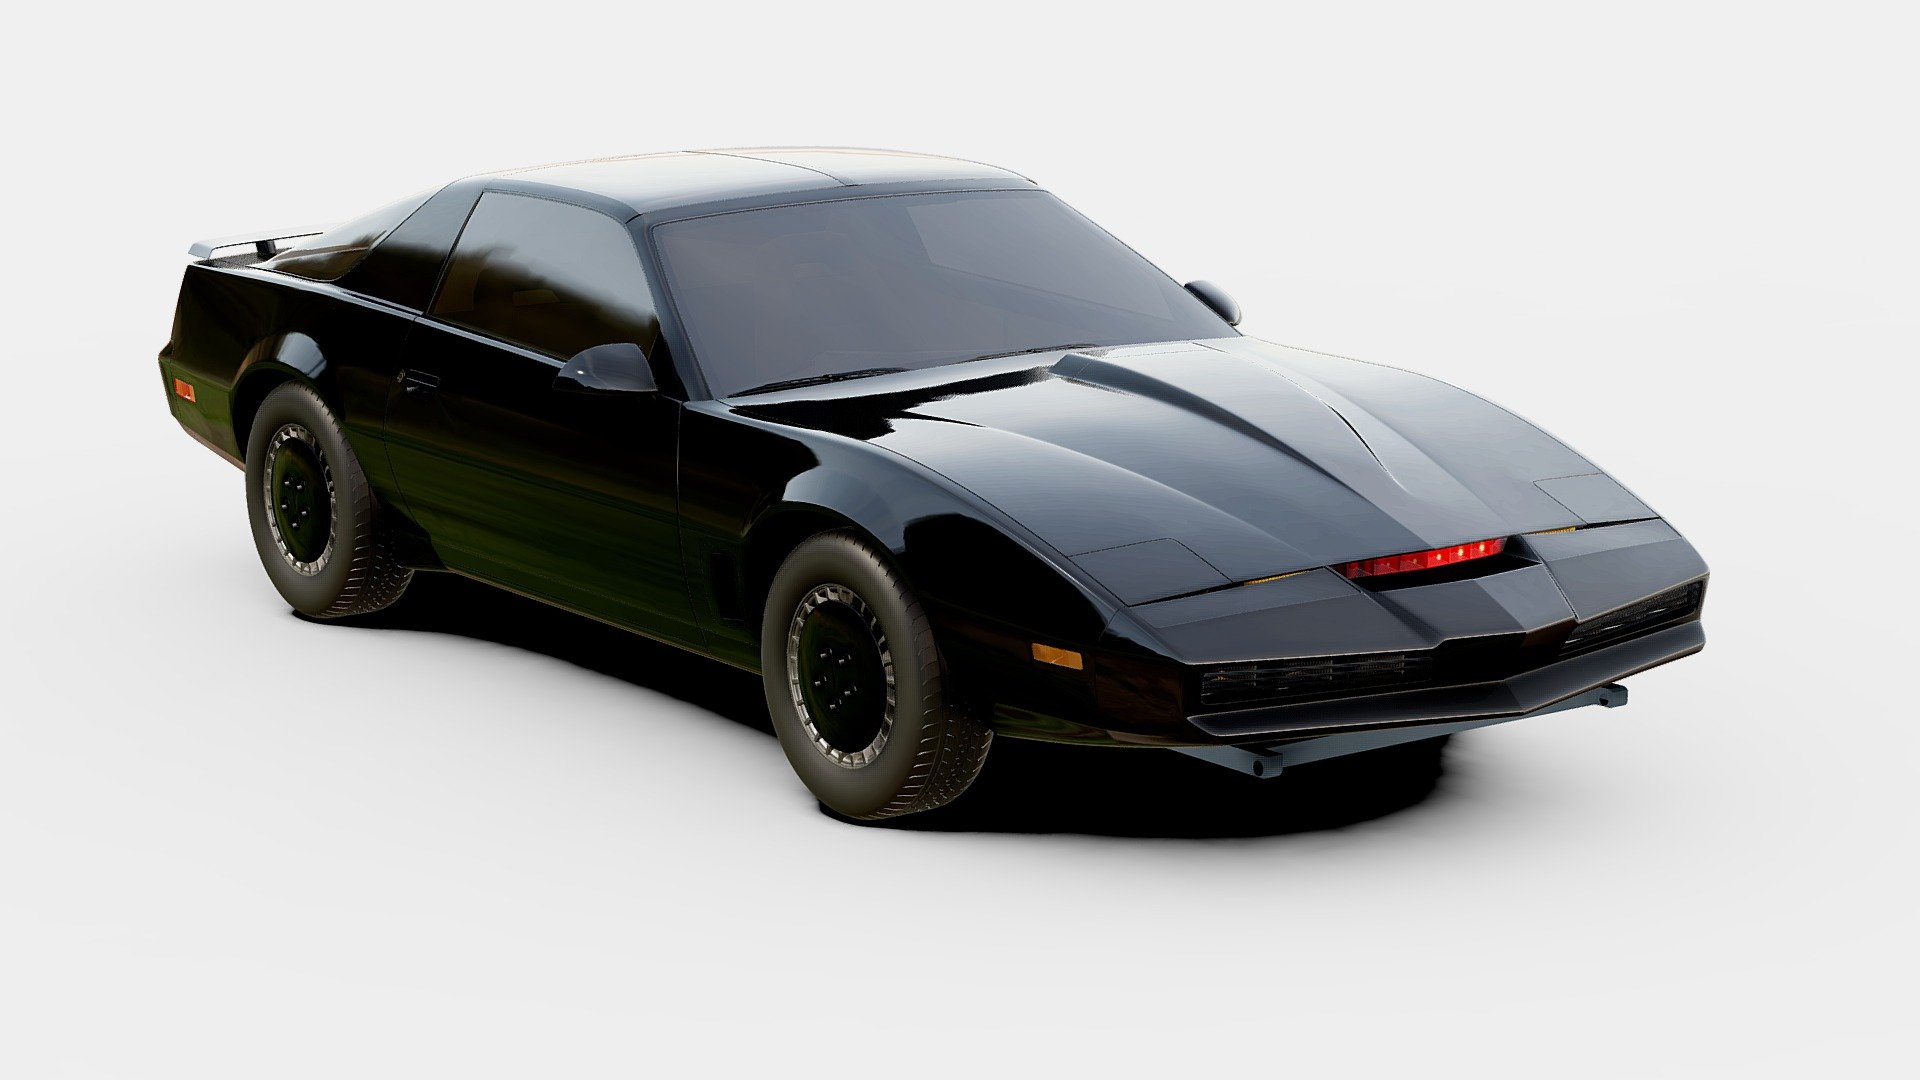 KITT is a fictional automobile featured in the television series Knight Rider (Supercar); it is a black car equipped with Artificial Intelligence. The name is an acronym meaning Knight Industries Two Thousand; Car model is a 1982 Pontiac Firebird Trans Am.

Model purchased on Hum-3d with Royalty Free License and edited by me in the internal and external parts. 

https://hum3d.com/it/3d-models/pontiac-firebird-knight-rider/

This model is not for sale but for illustrative purposes only 3d model